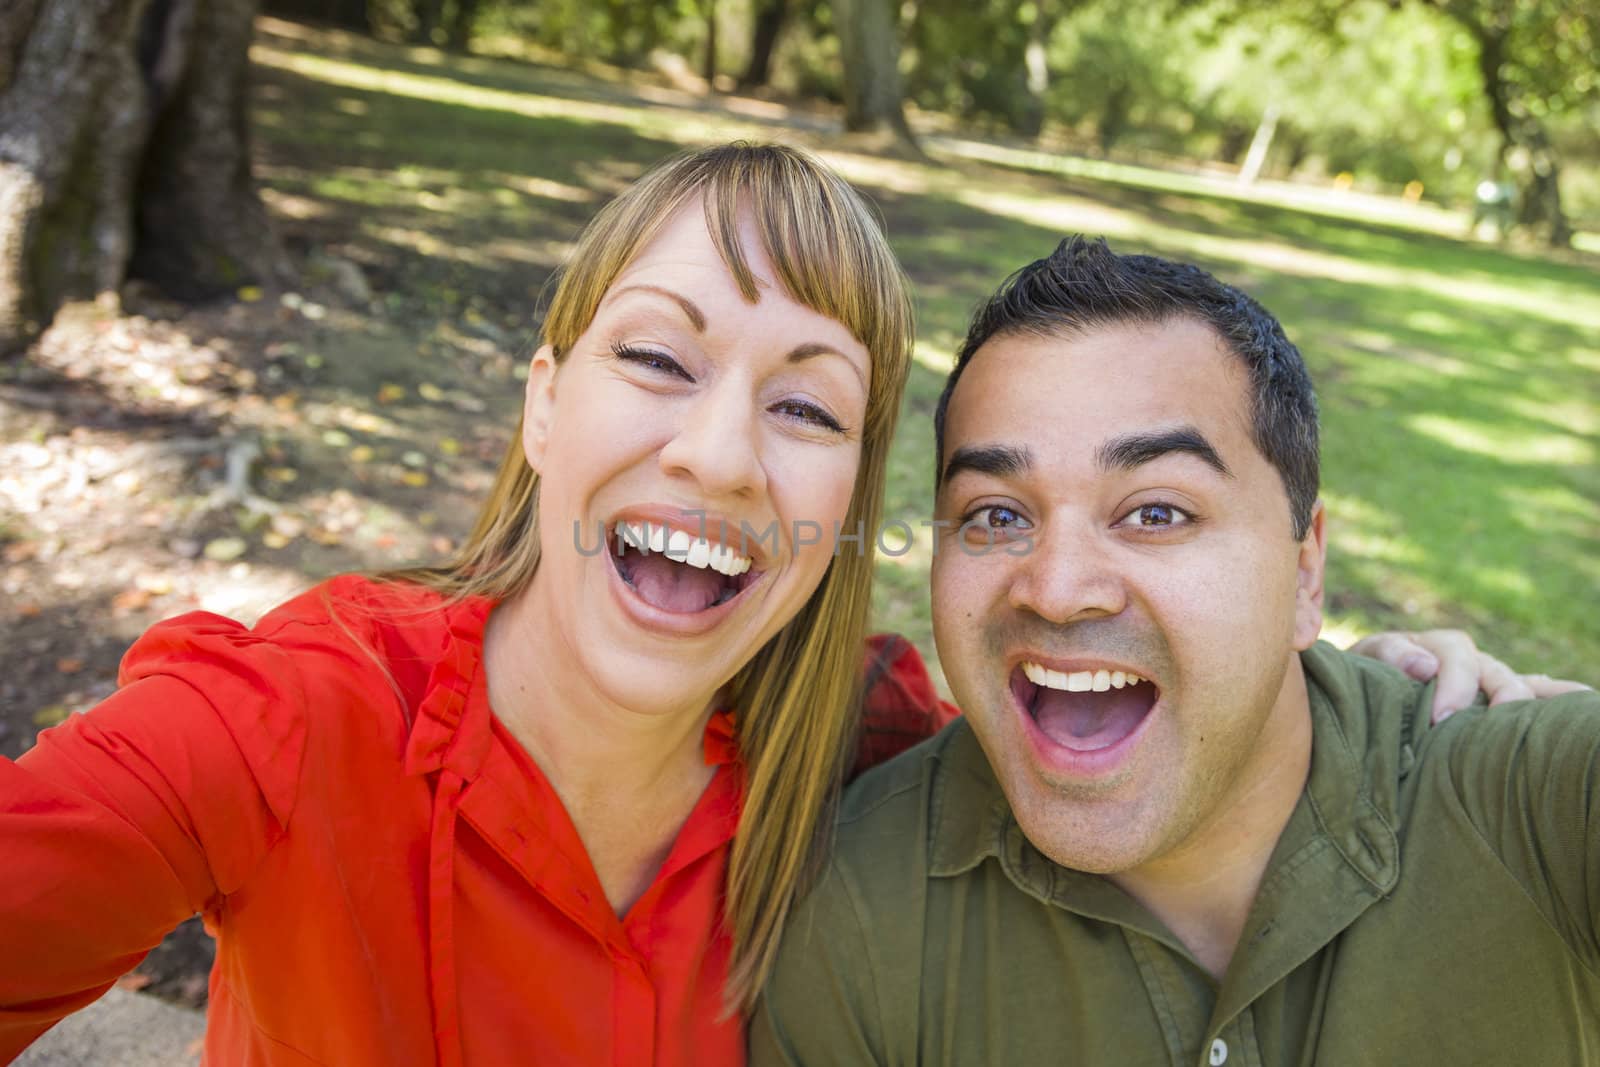 Mixed Race Couple Self Portrait at the Park by Feverpitched